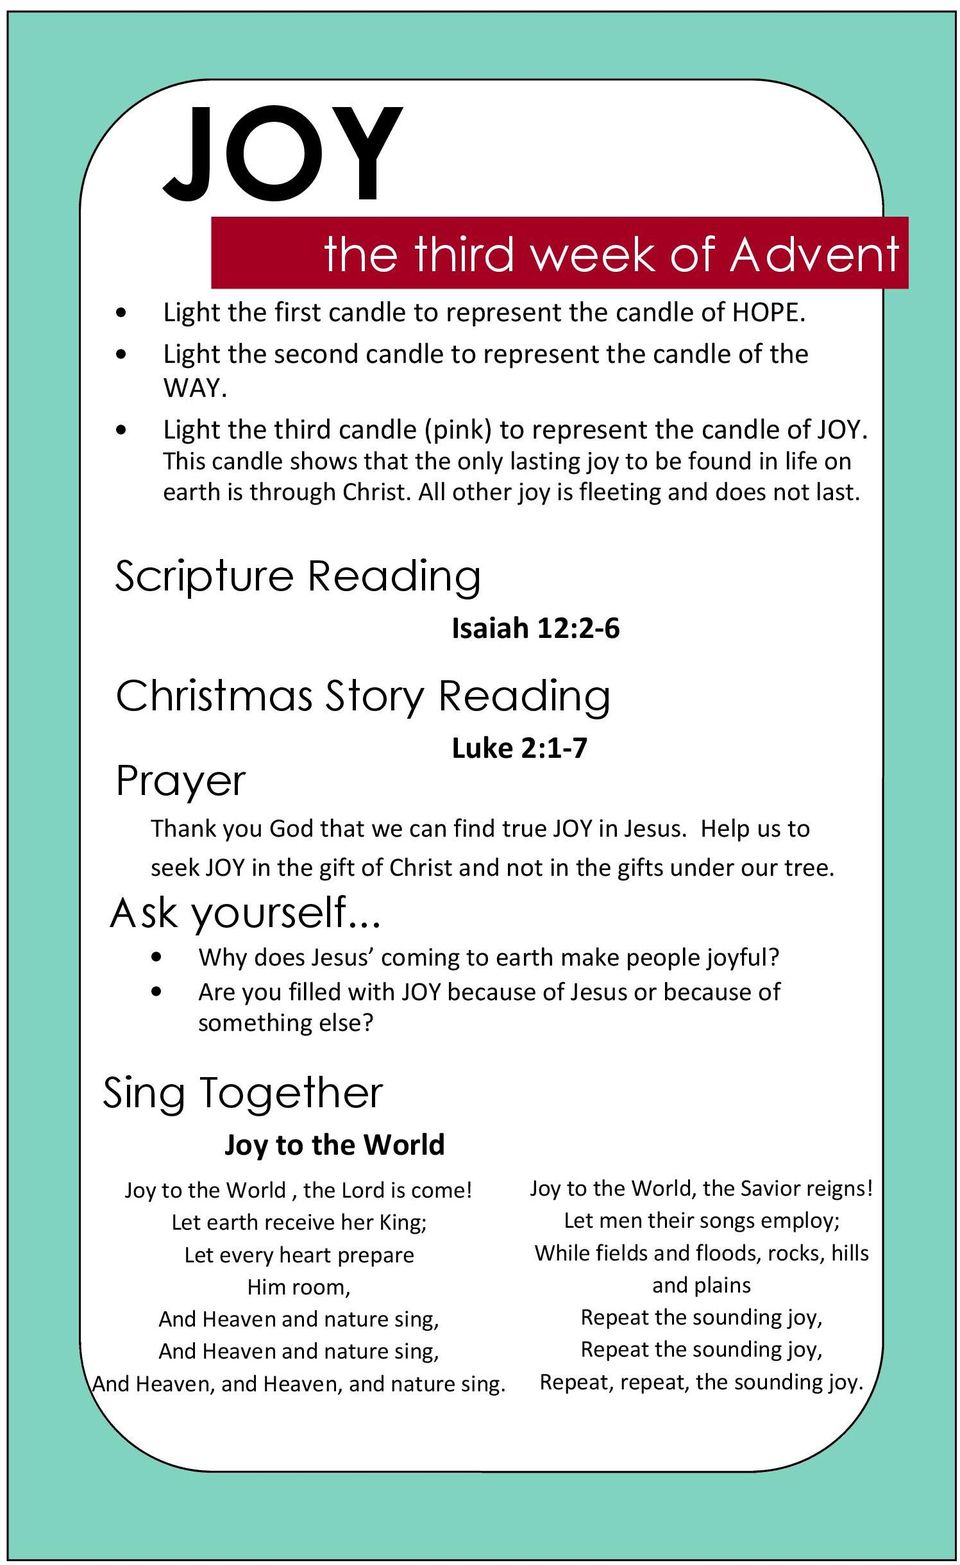 Scripture Reading Isaiah 12:2-6 Christmas Story Reading Luke 2:1-7 Thank you God that we can find true JOY in Jesus. Help us to seek JOY in the gift of Christ and not in the gifts under our tree.